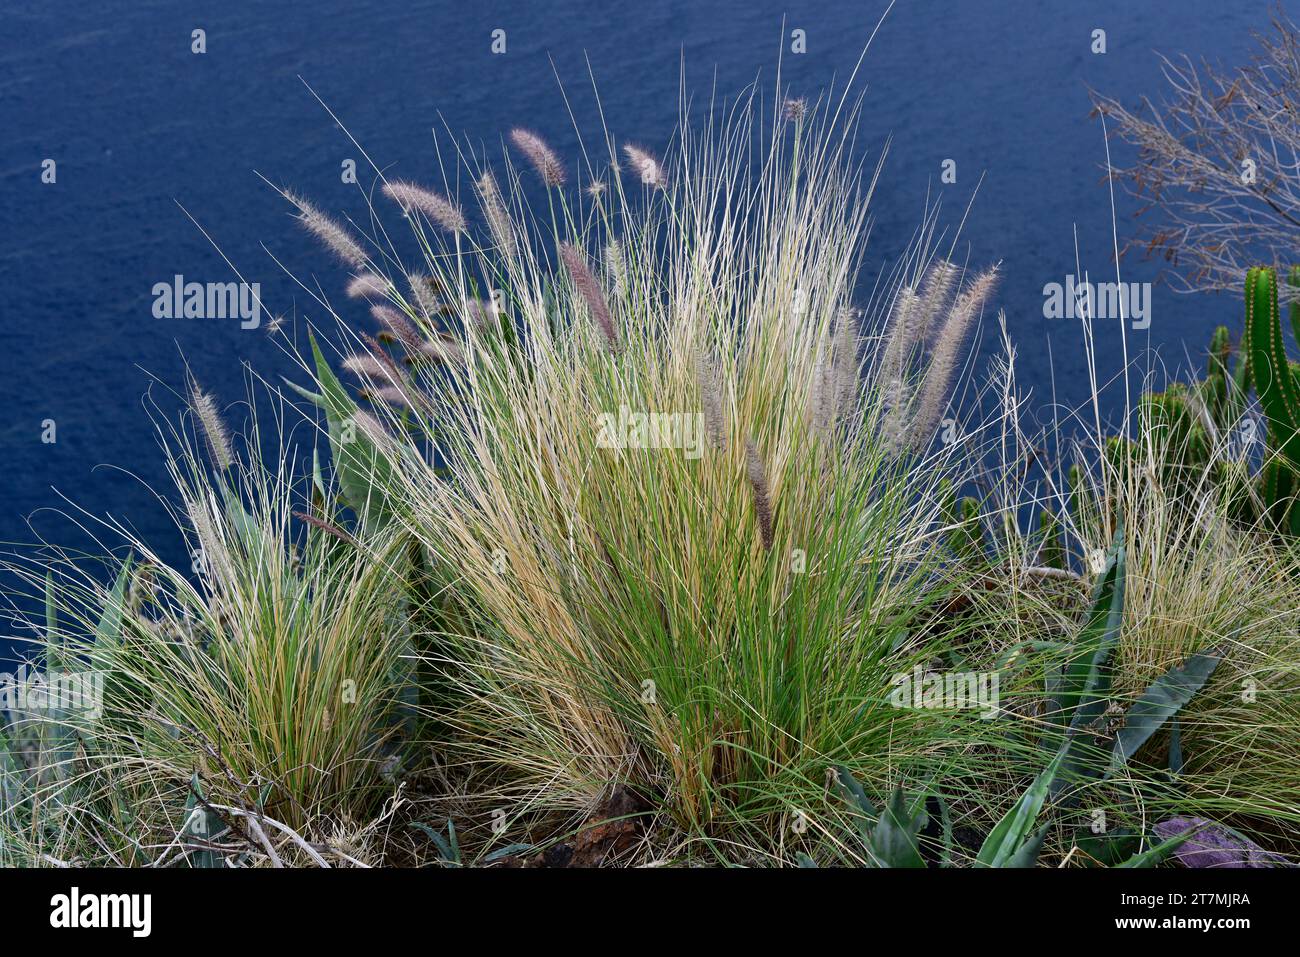 Rabo de gato (Pennisetum setaceum or Cenchrus setaceus) is a perennial herb native to east Africa, Middle East and southwestern Asia and naturalized i Stock Photo